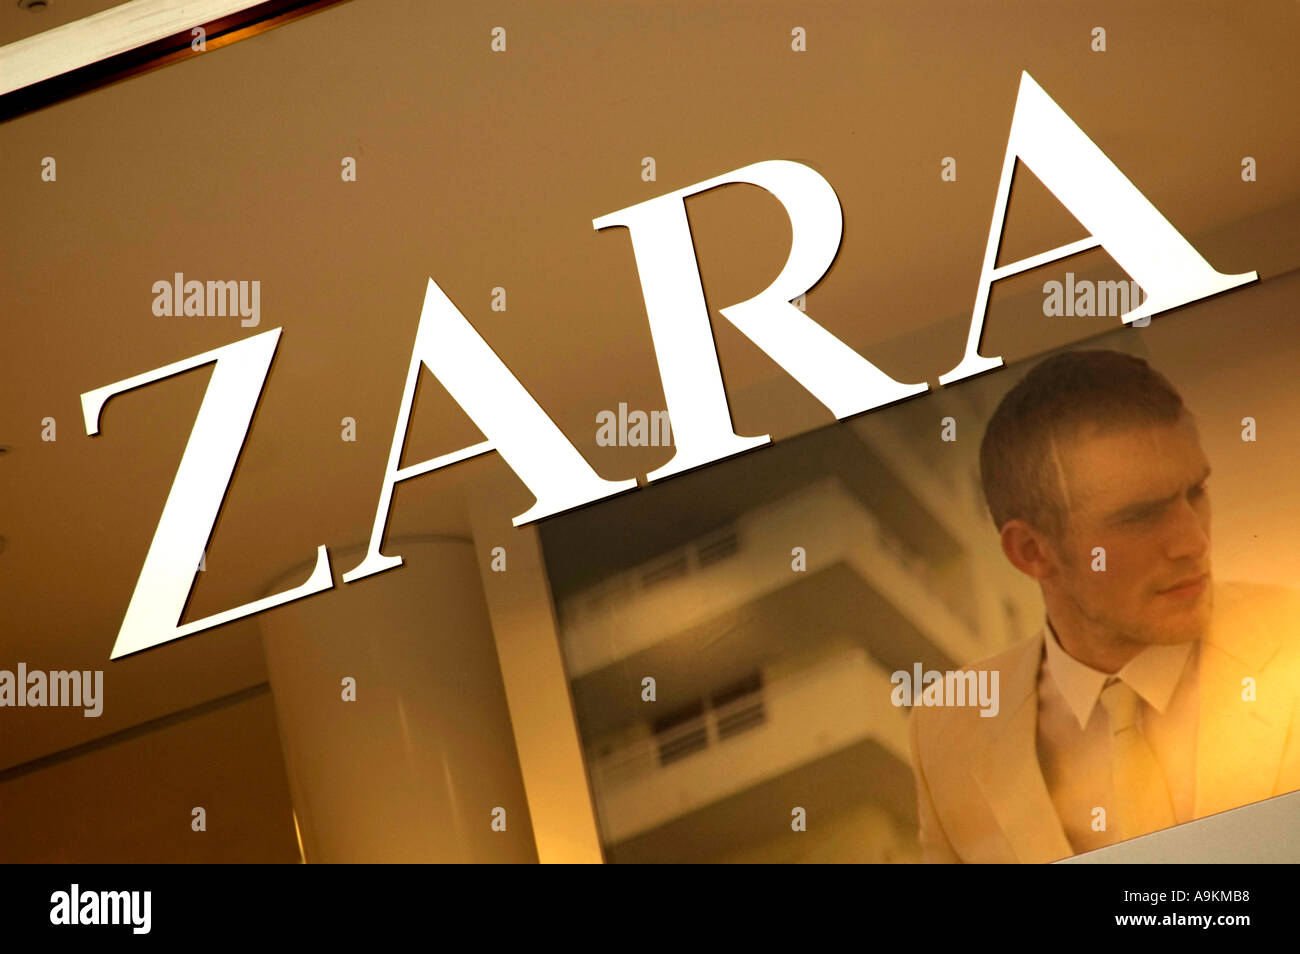 Zara sign hi-res stock photography and images - Page 9 - Alamy